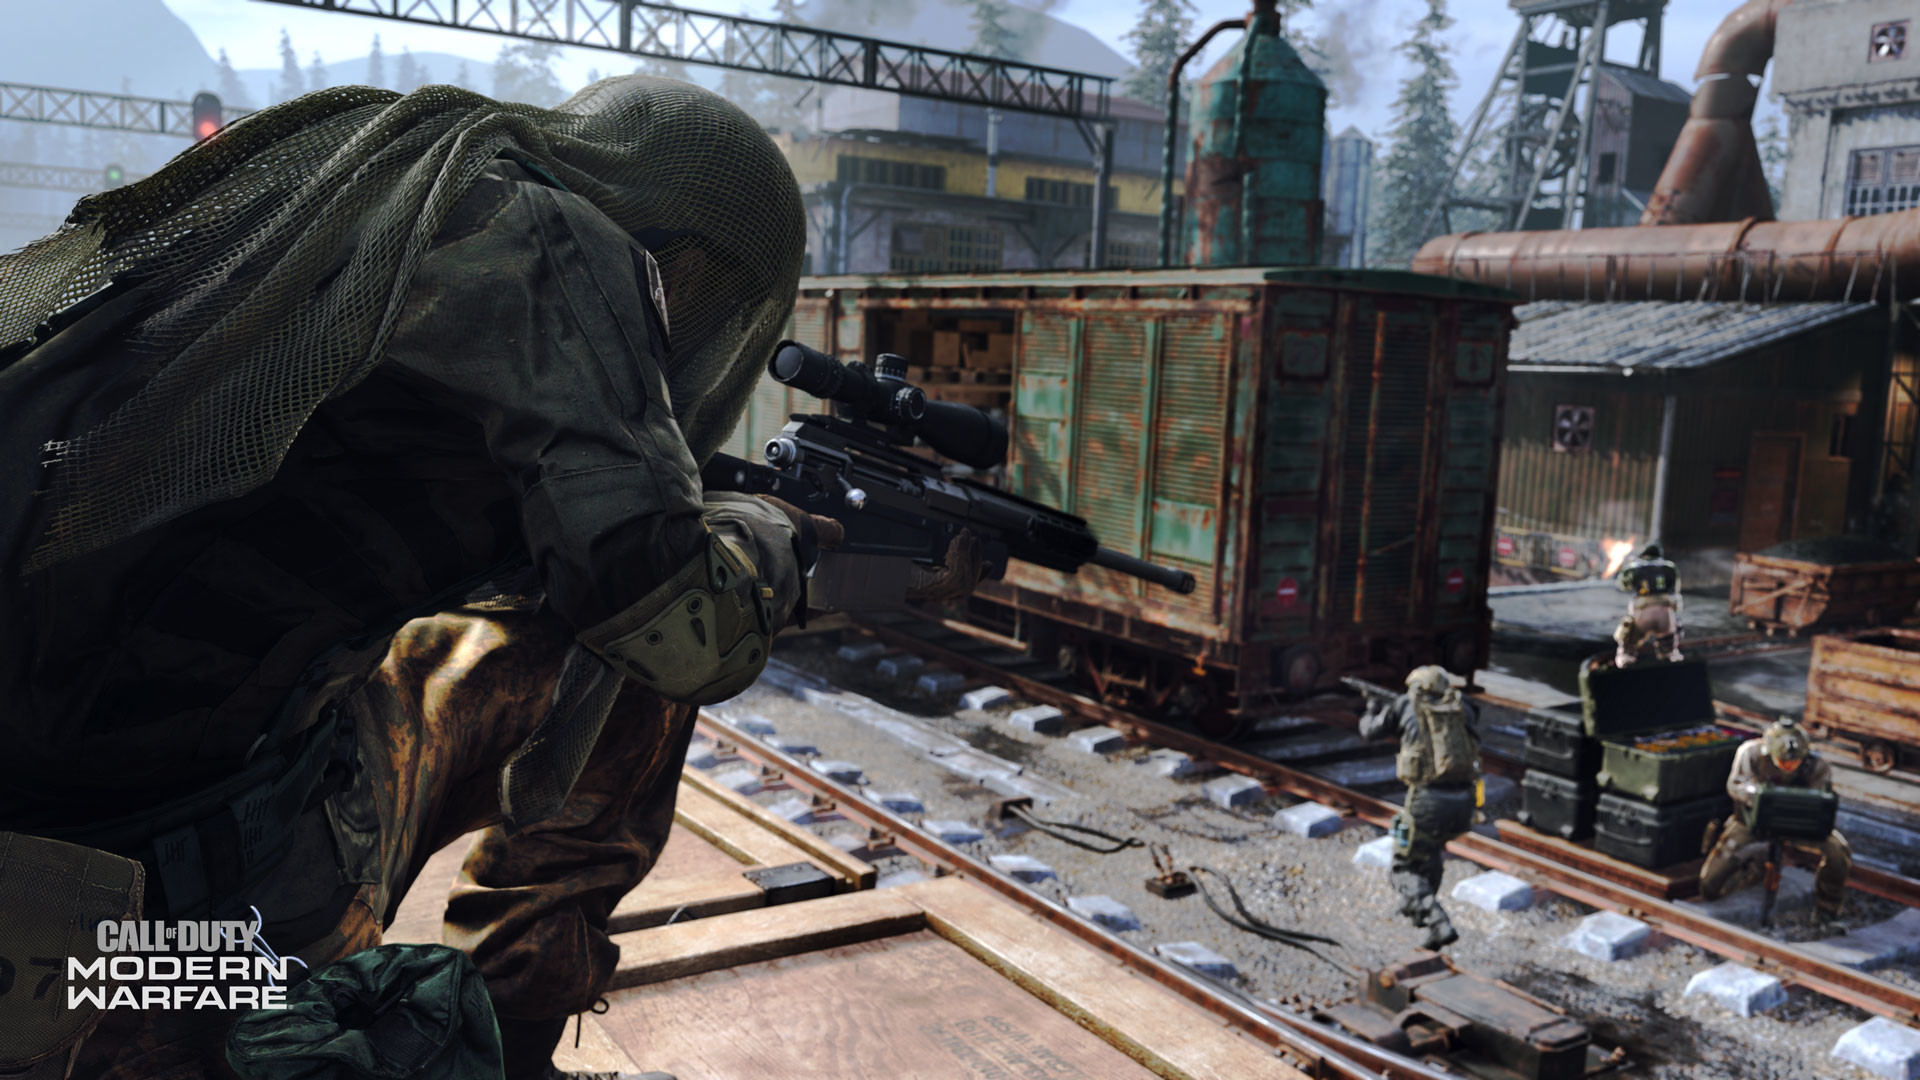 System Requirements for Call of Duty Modern Warfare Released TechPowerUp